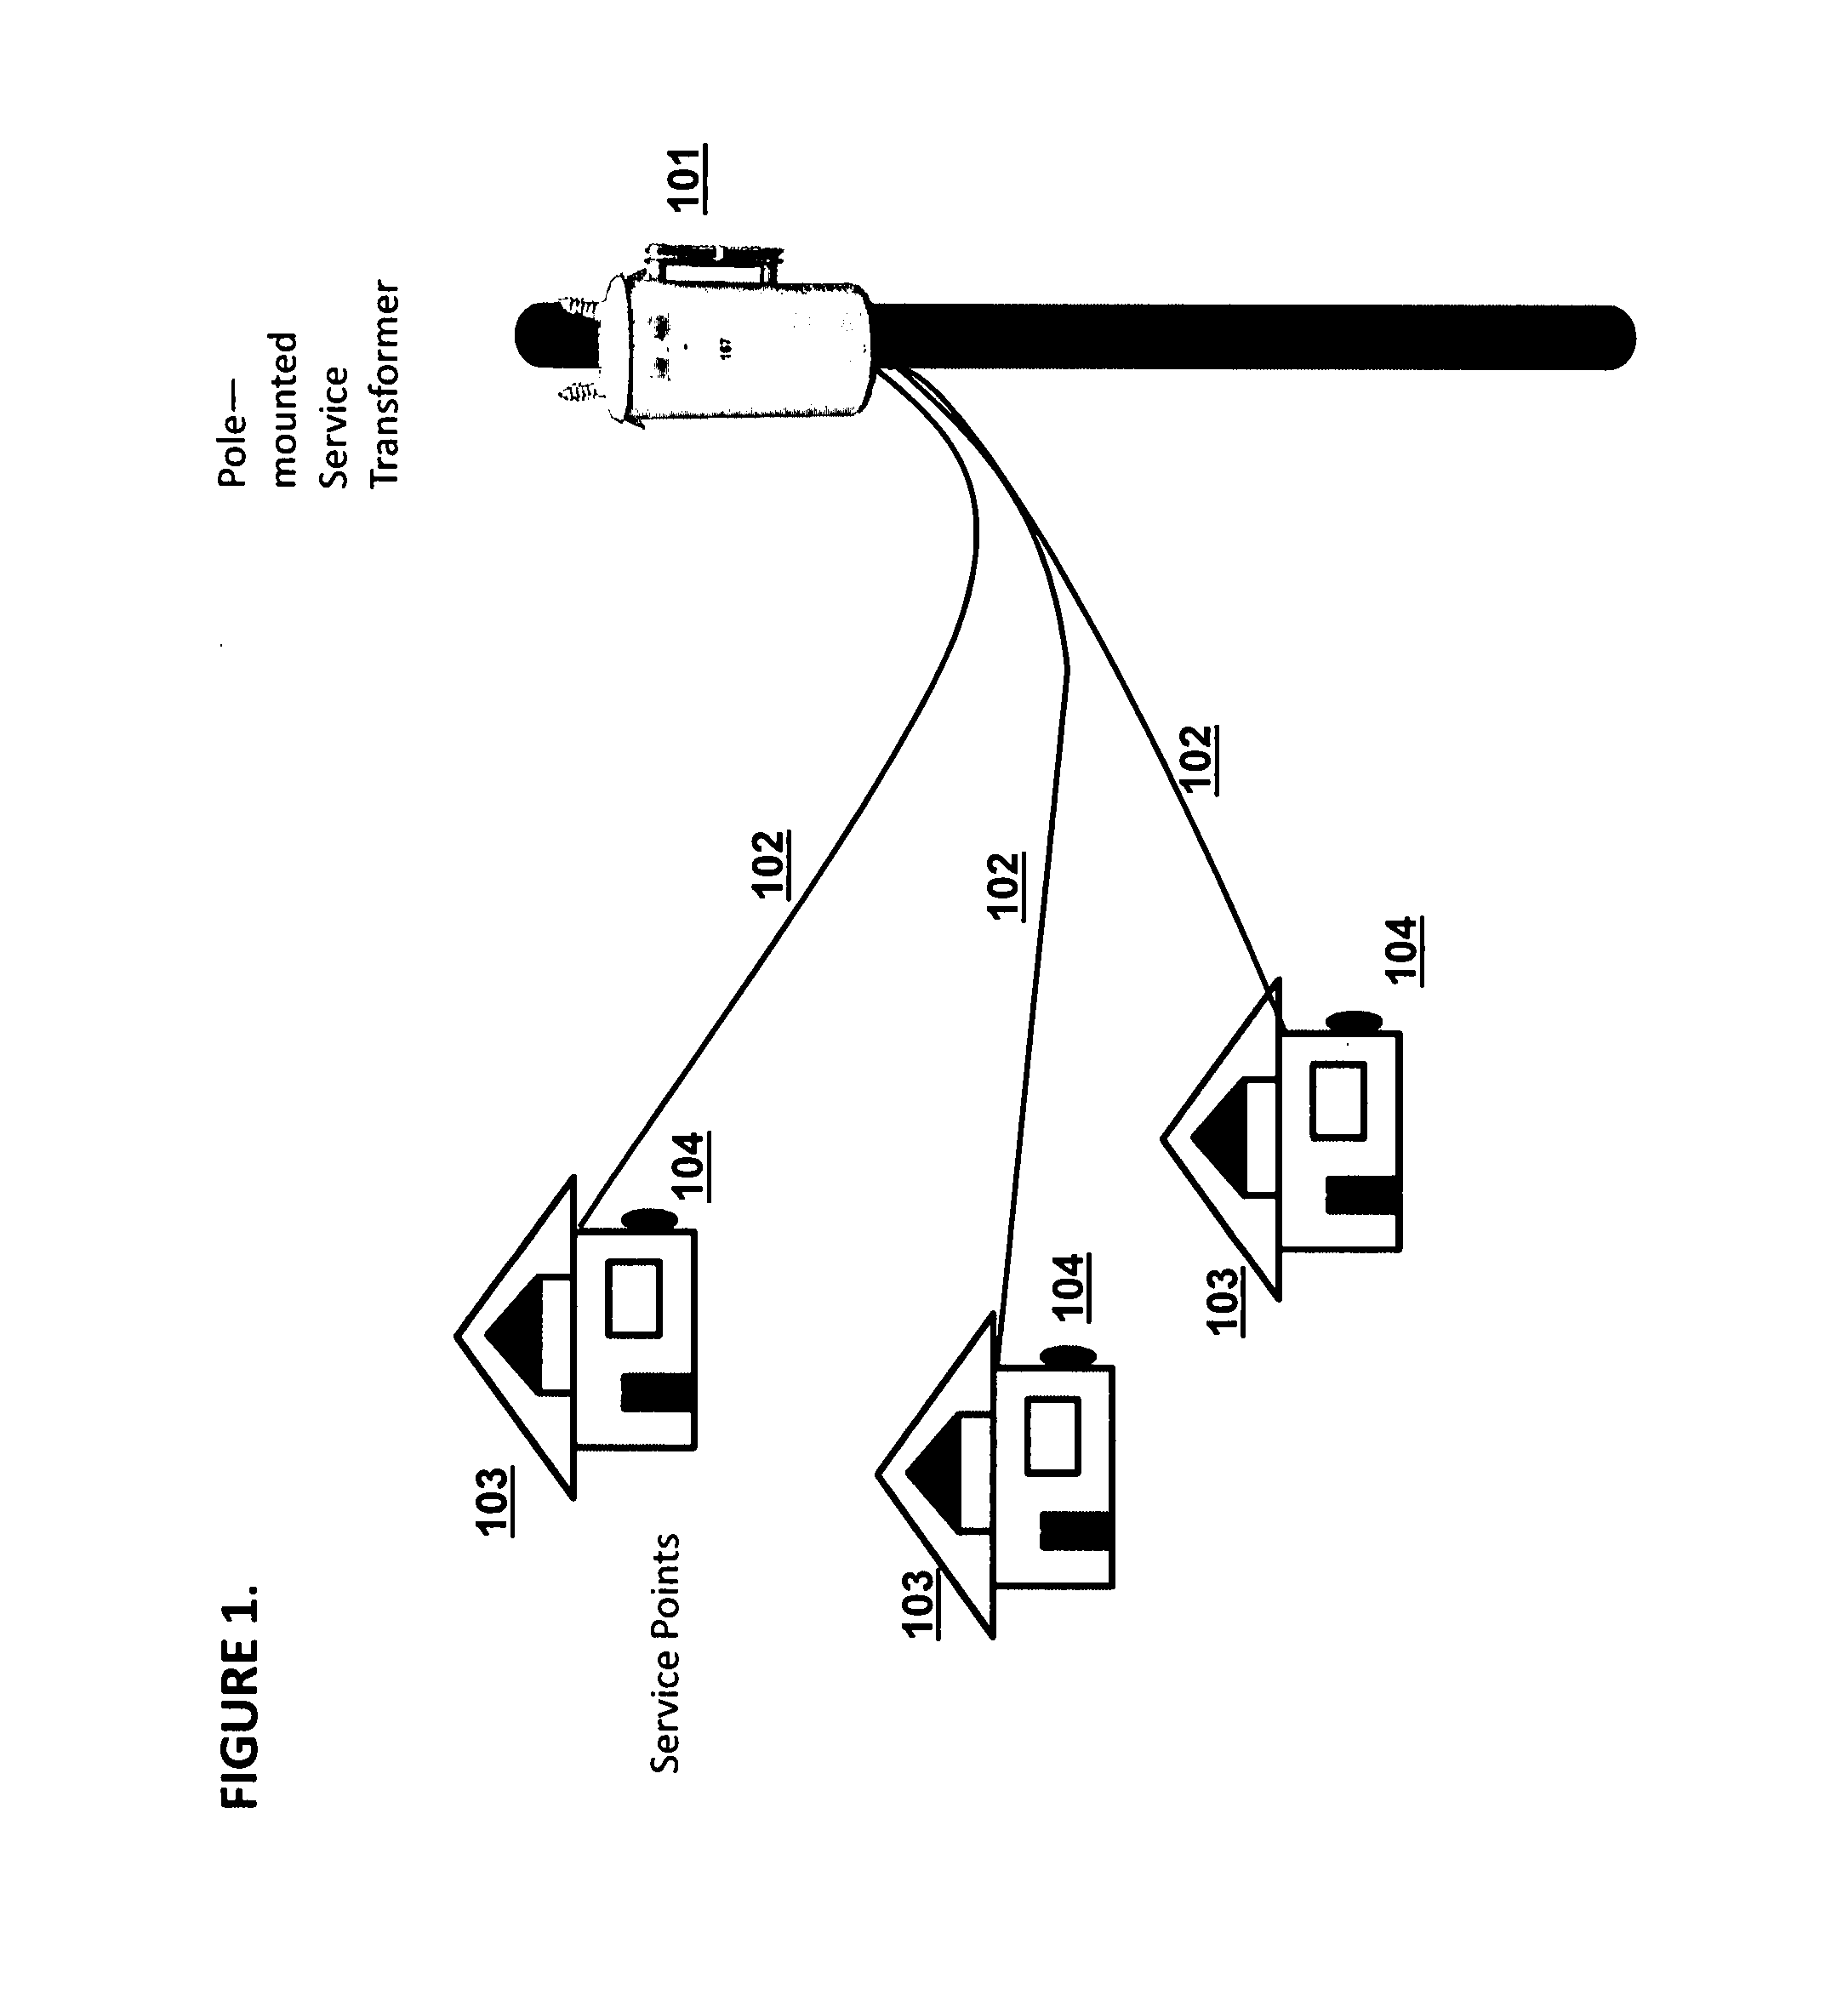 System and method for detecting and localizing non-technical losses in an electrical power distribution grid